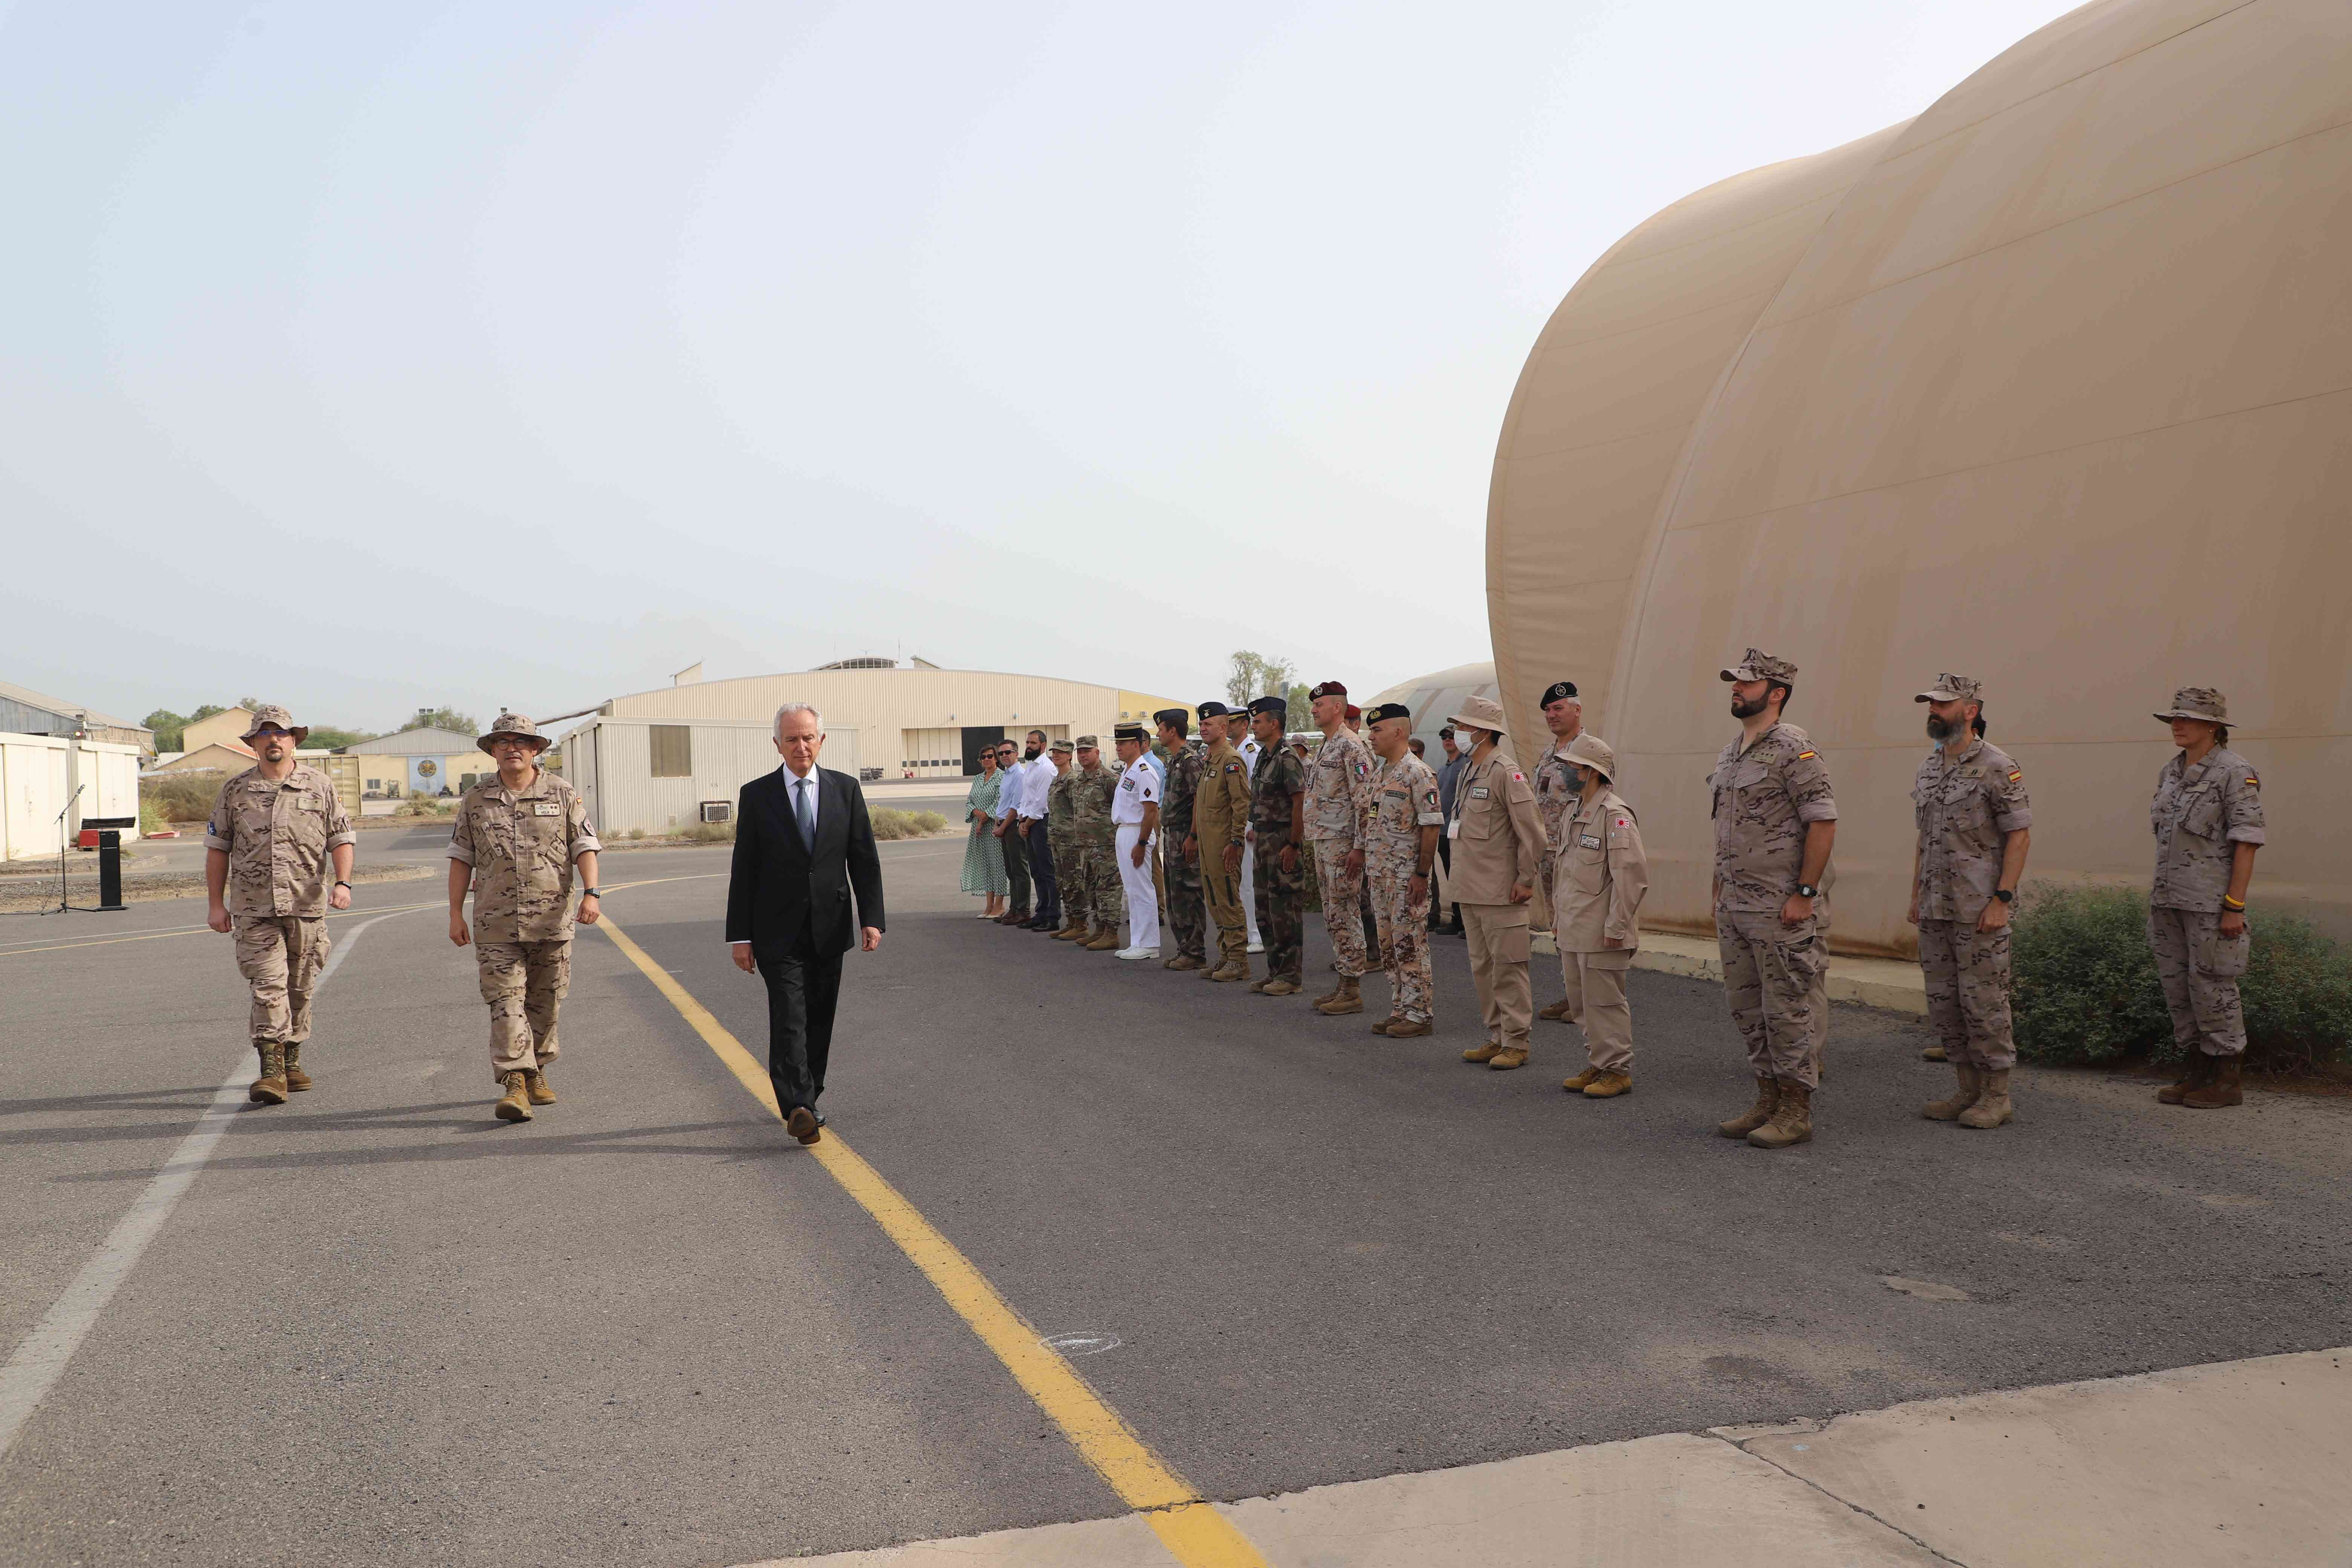 Arrival of the Spanish Ambassador to the Base